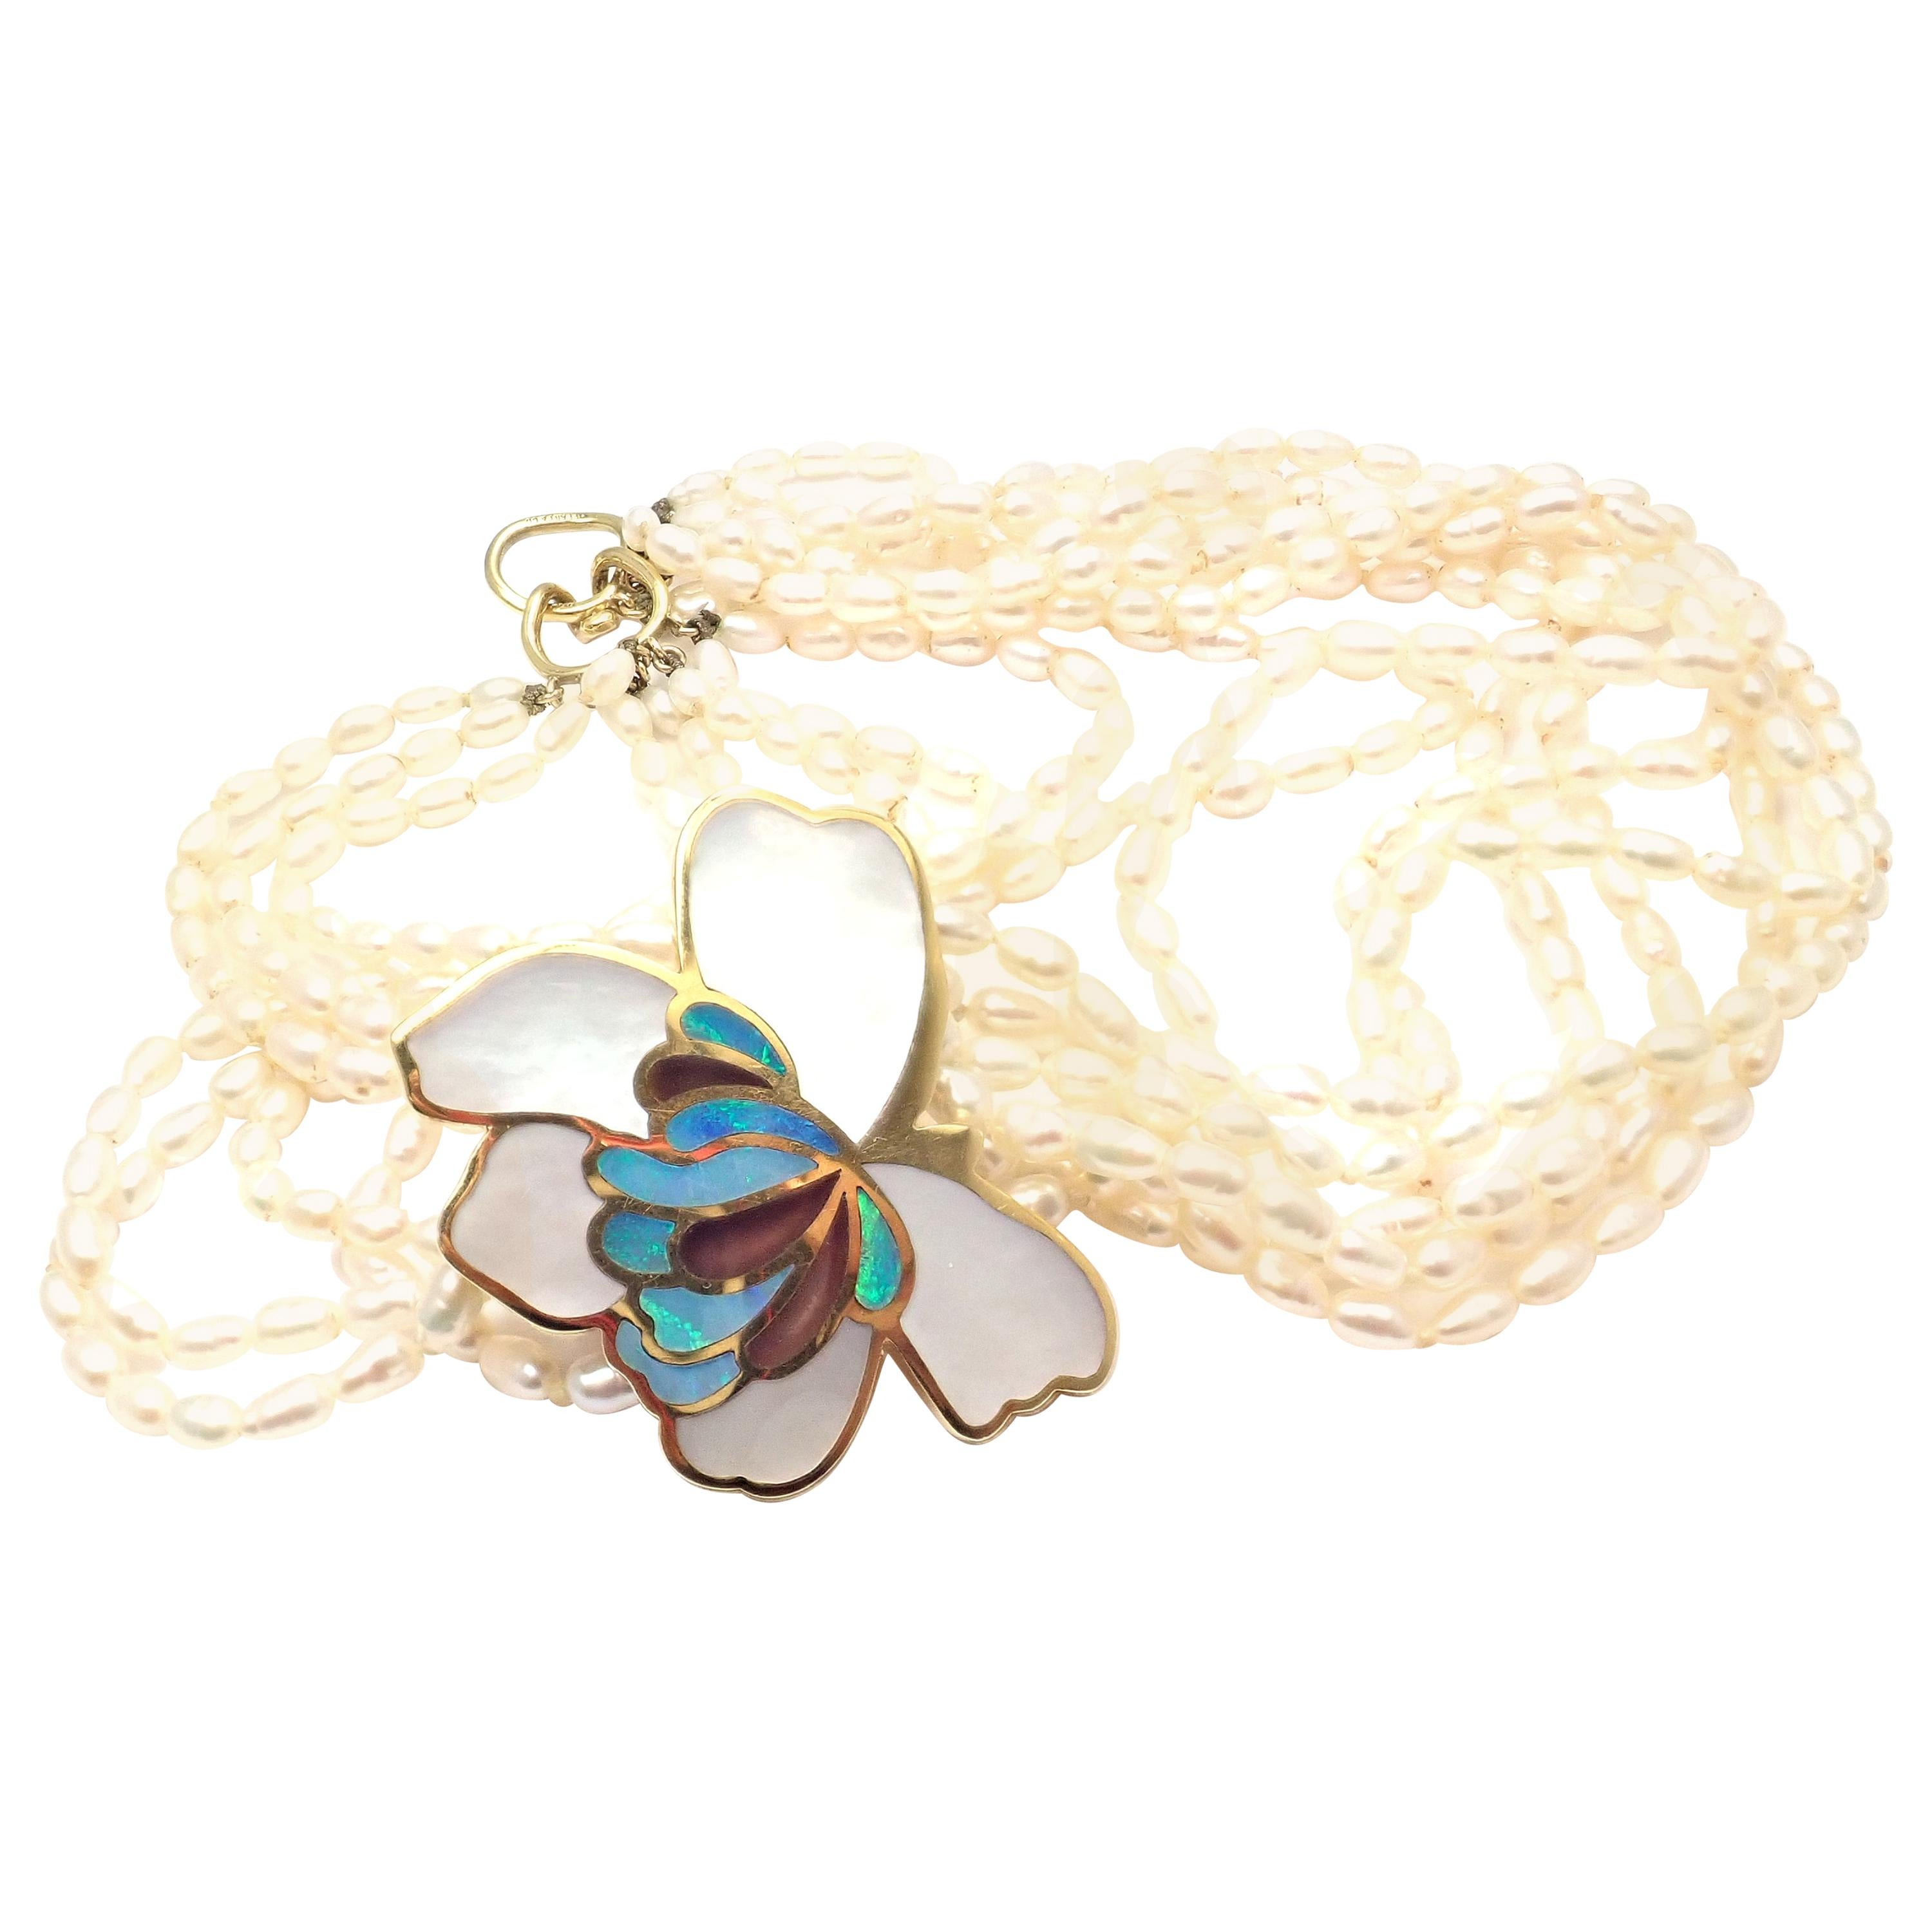 Tiffany & Co. Inlaid Mother of Pearl Opal Flower Yellow Gold Pendant Necklace